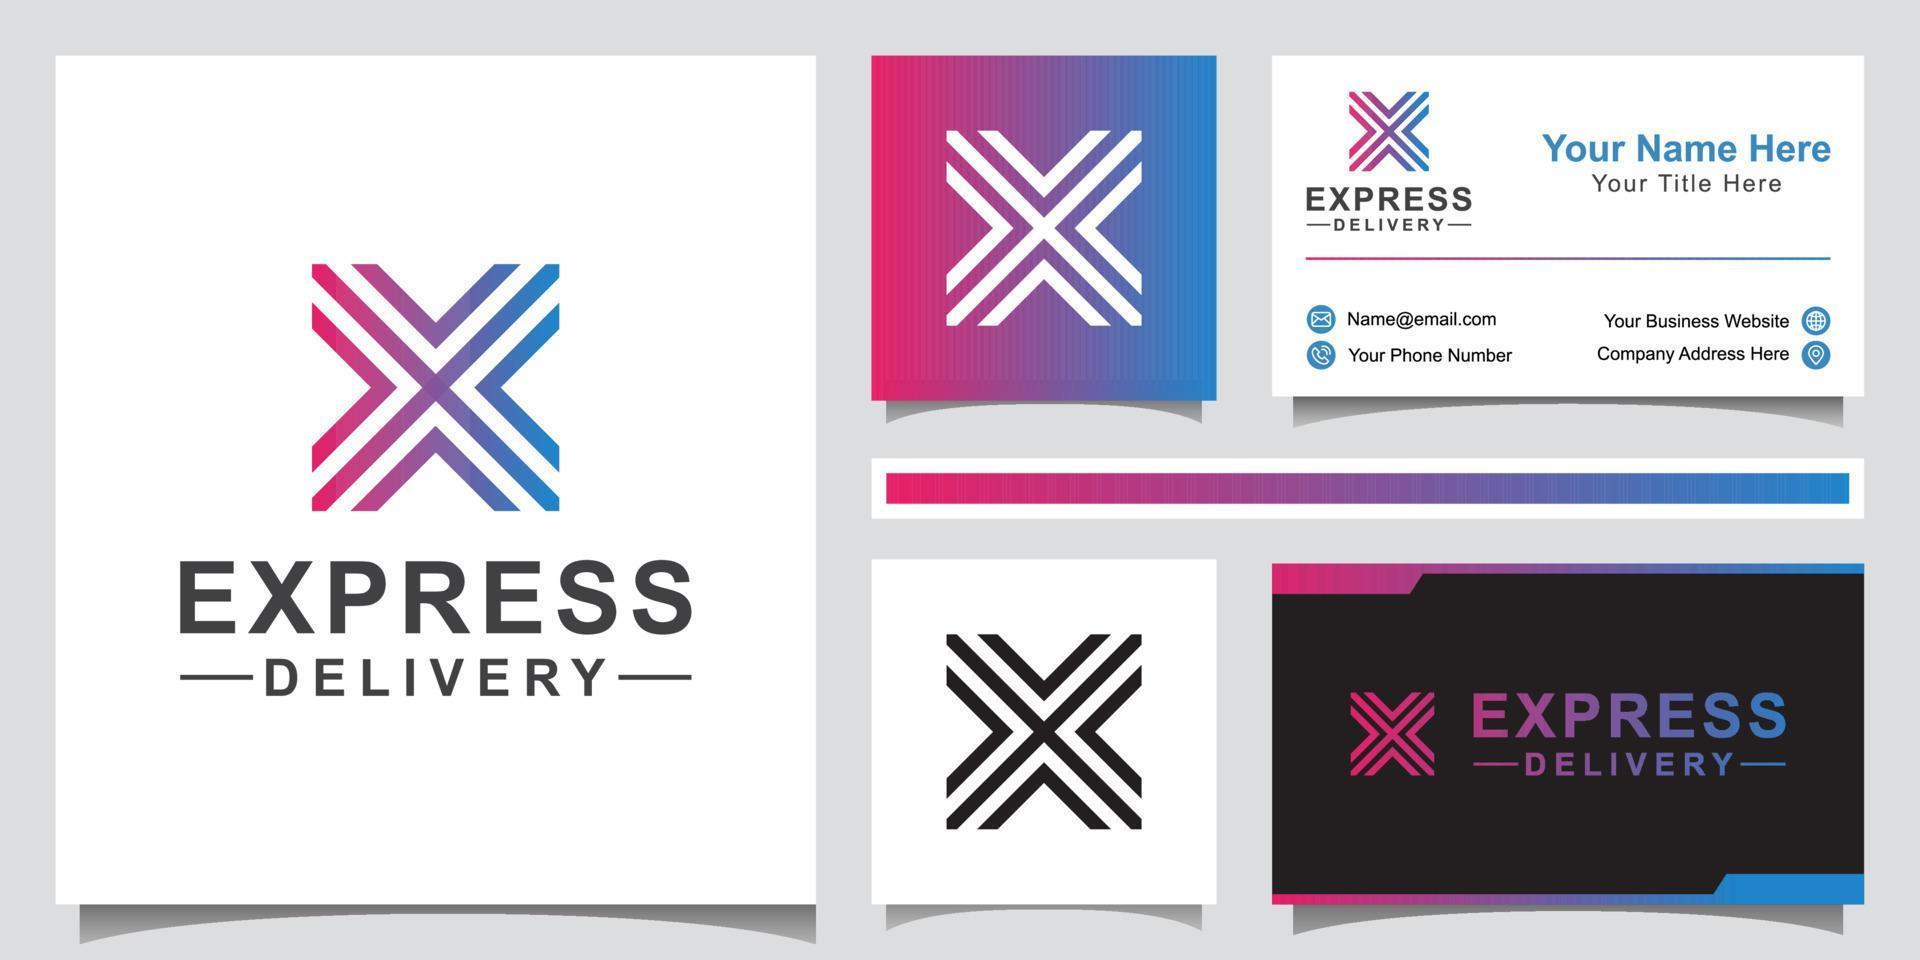 modern logo design of Delivery logistic. letter x with arrow symbol logo concept with business card vector